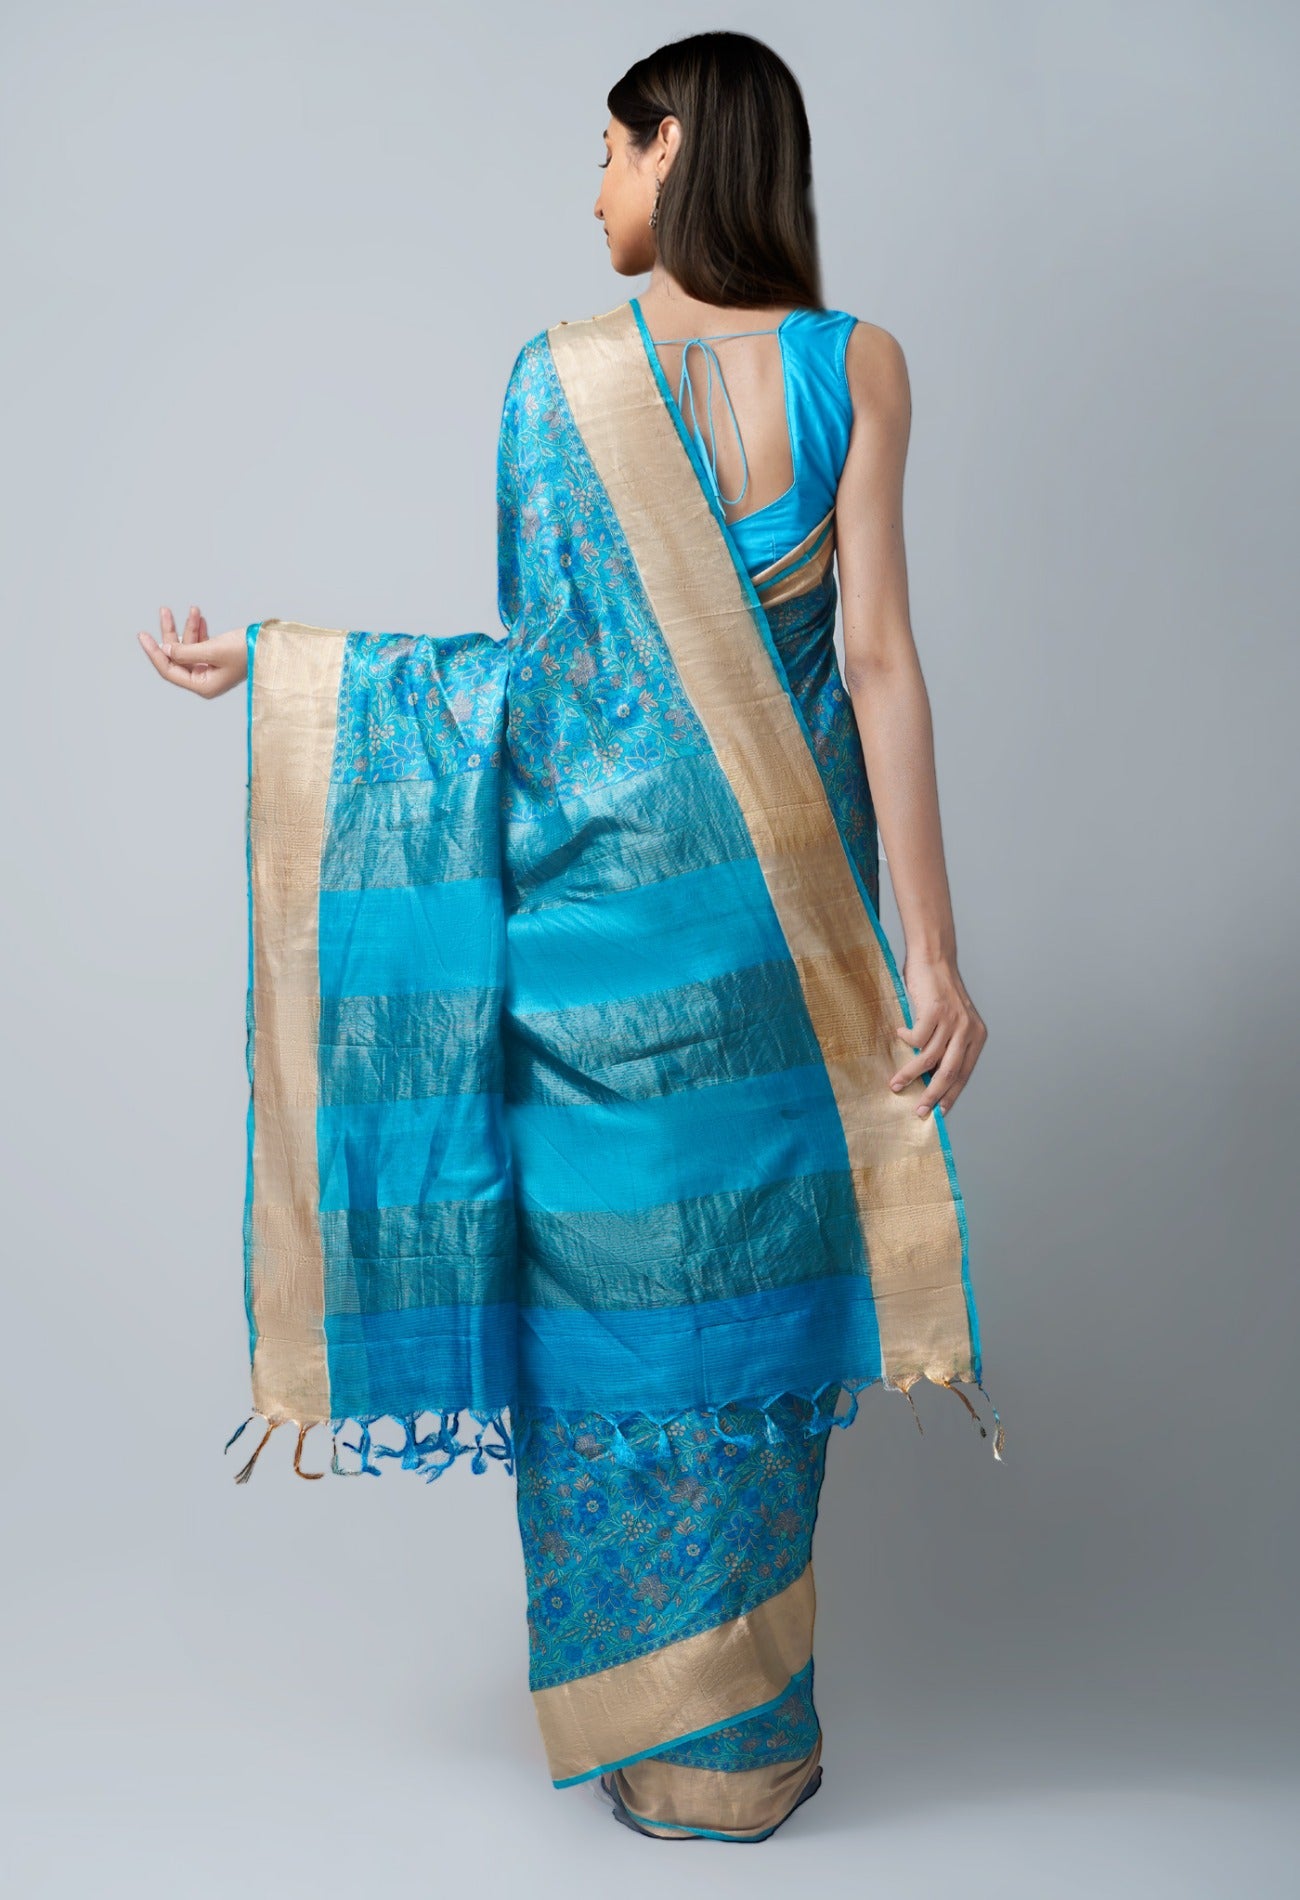 Online Shopping for Blue Pure Handloom Bengal Tussar  Silk Saree with Embroidery from Chhattisgarh at Unnatisilks.com India
